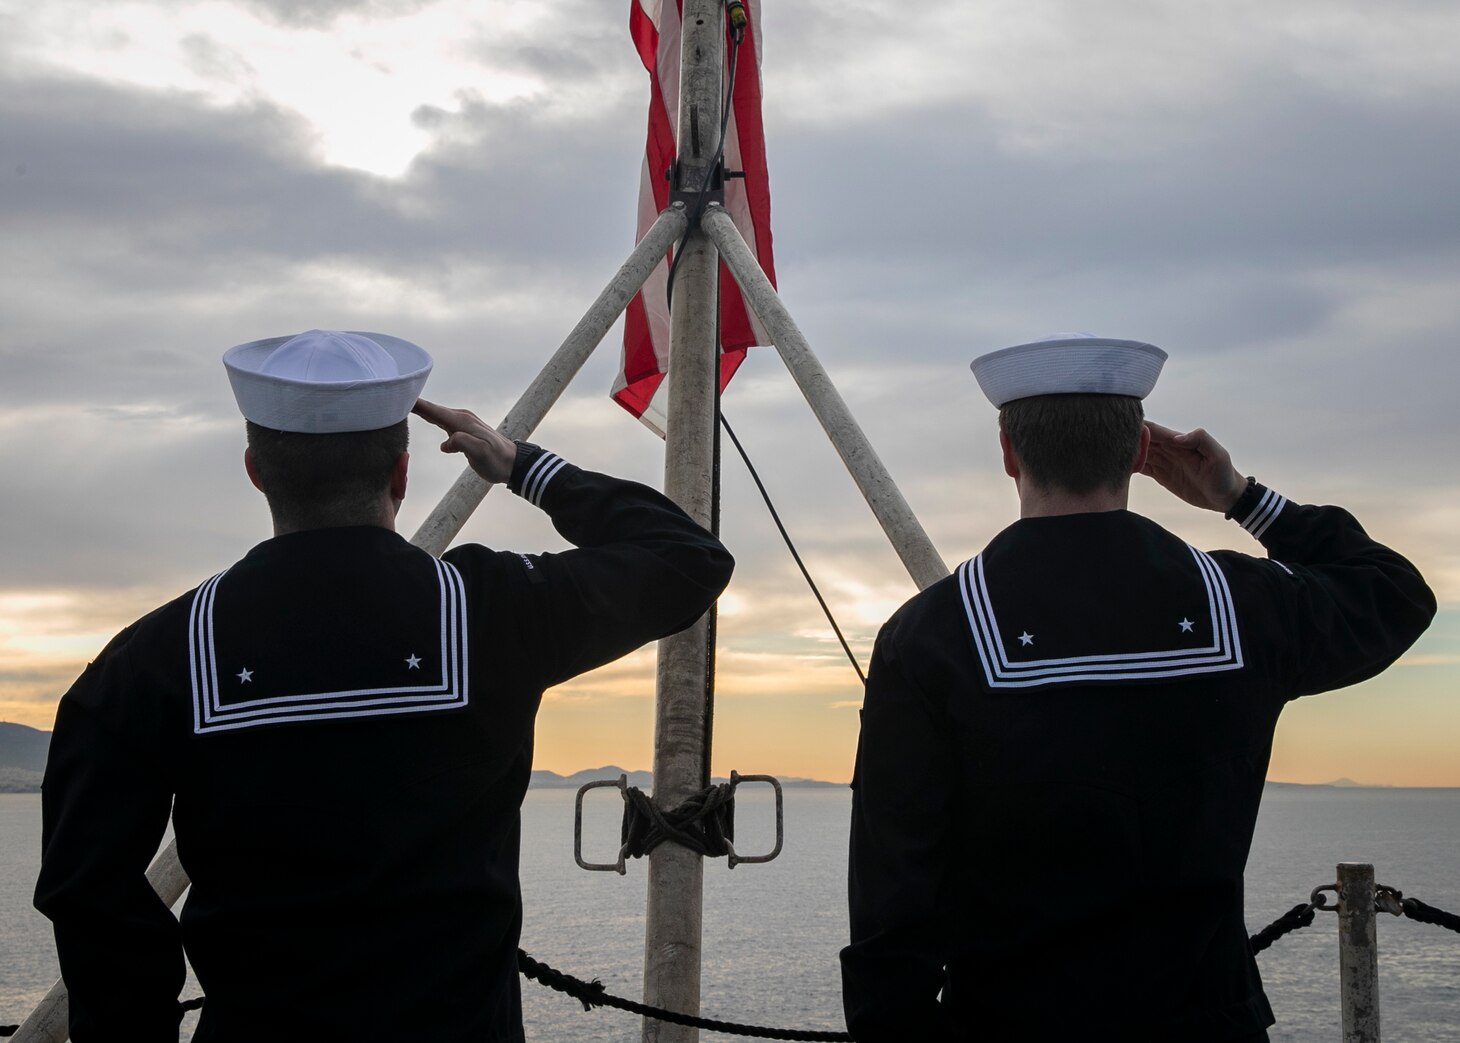 Seaman Dylan Duce, left, and Airman Evan Rowe, both assigned to the Nimitz-class aircraft carrier USS George H.W. Bush (CVN 77), salute the American flag, as the ship along with the embarked staff of Carrier Strike Group (CSG) 10, arrives in Piraeus, Greece, for a scheduled port visit, Feb. 3, 2023.